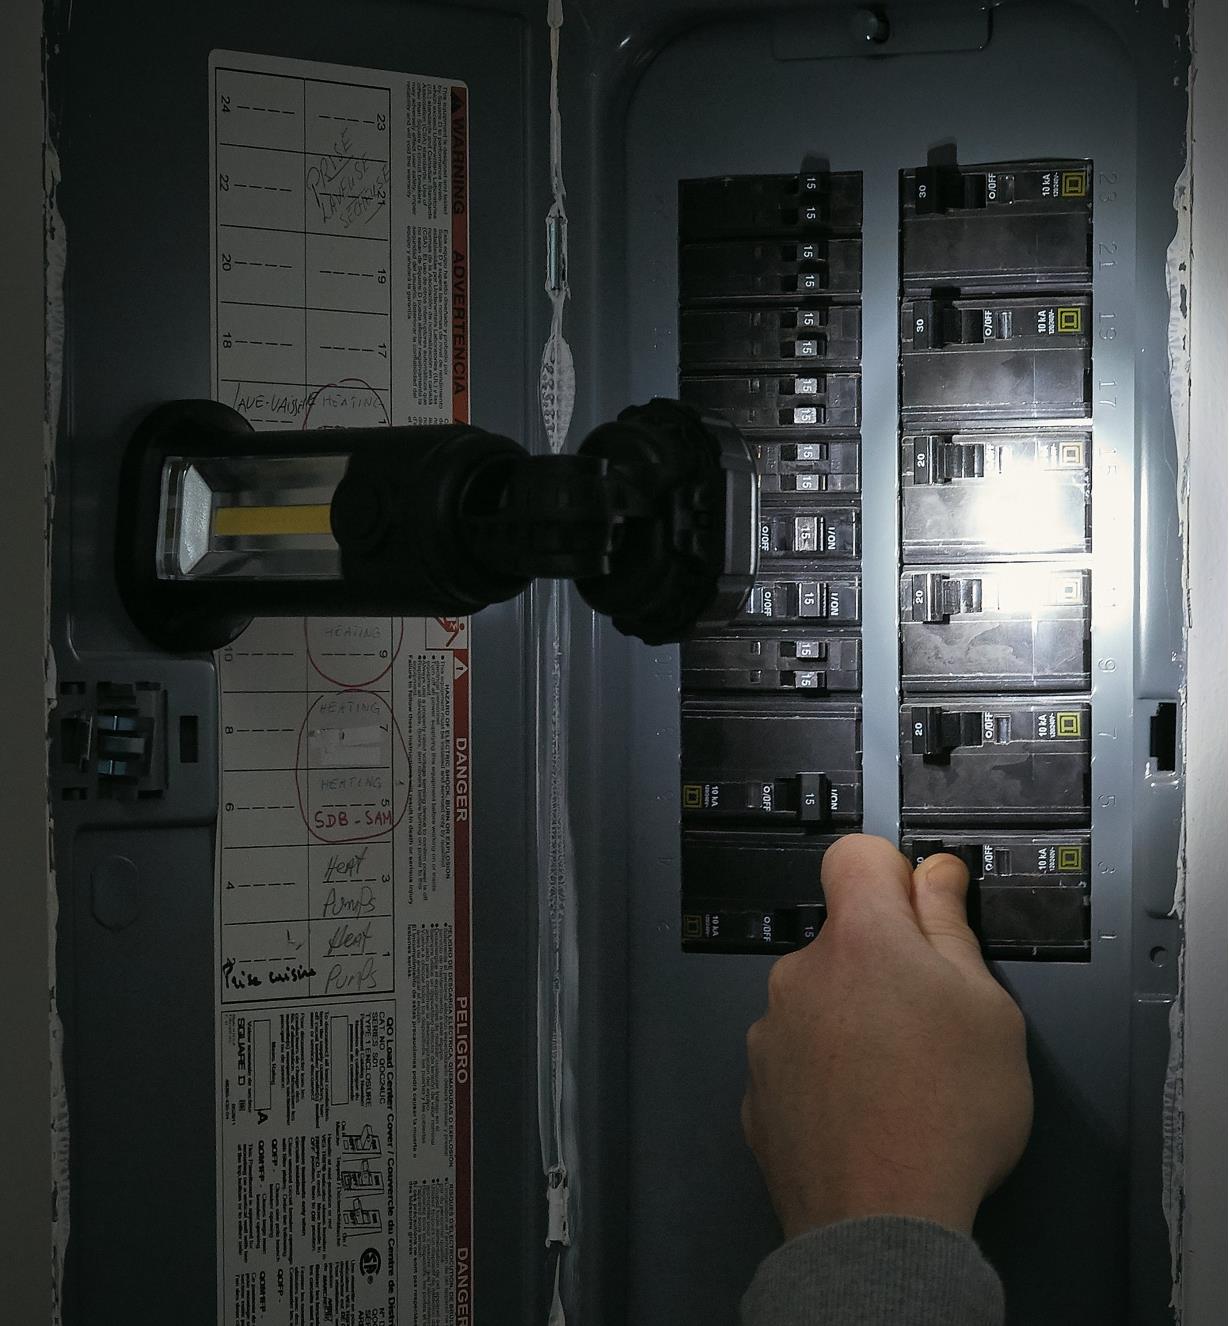 Easy-to-Aim Work Light illuminating an electrical panel